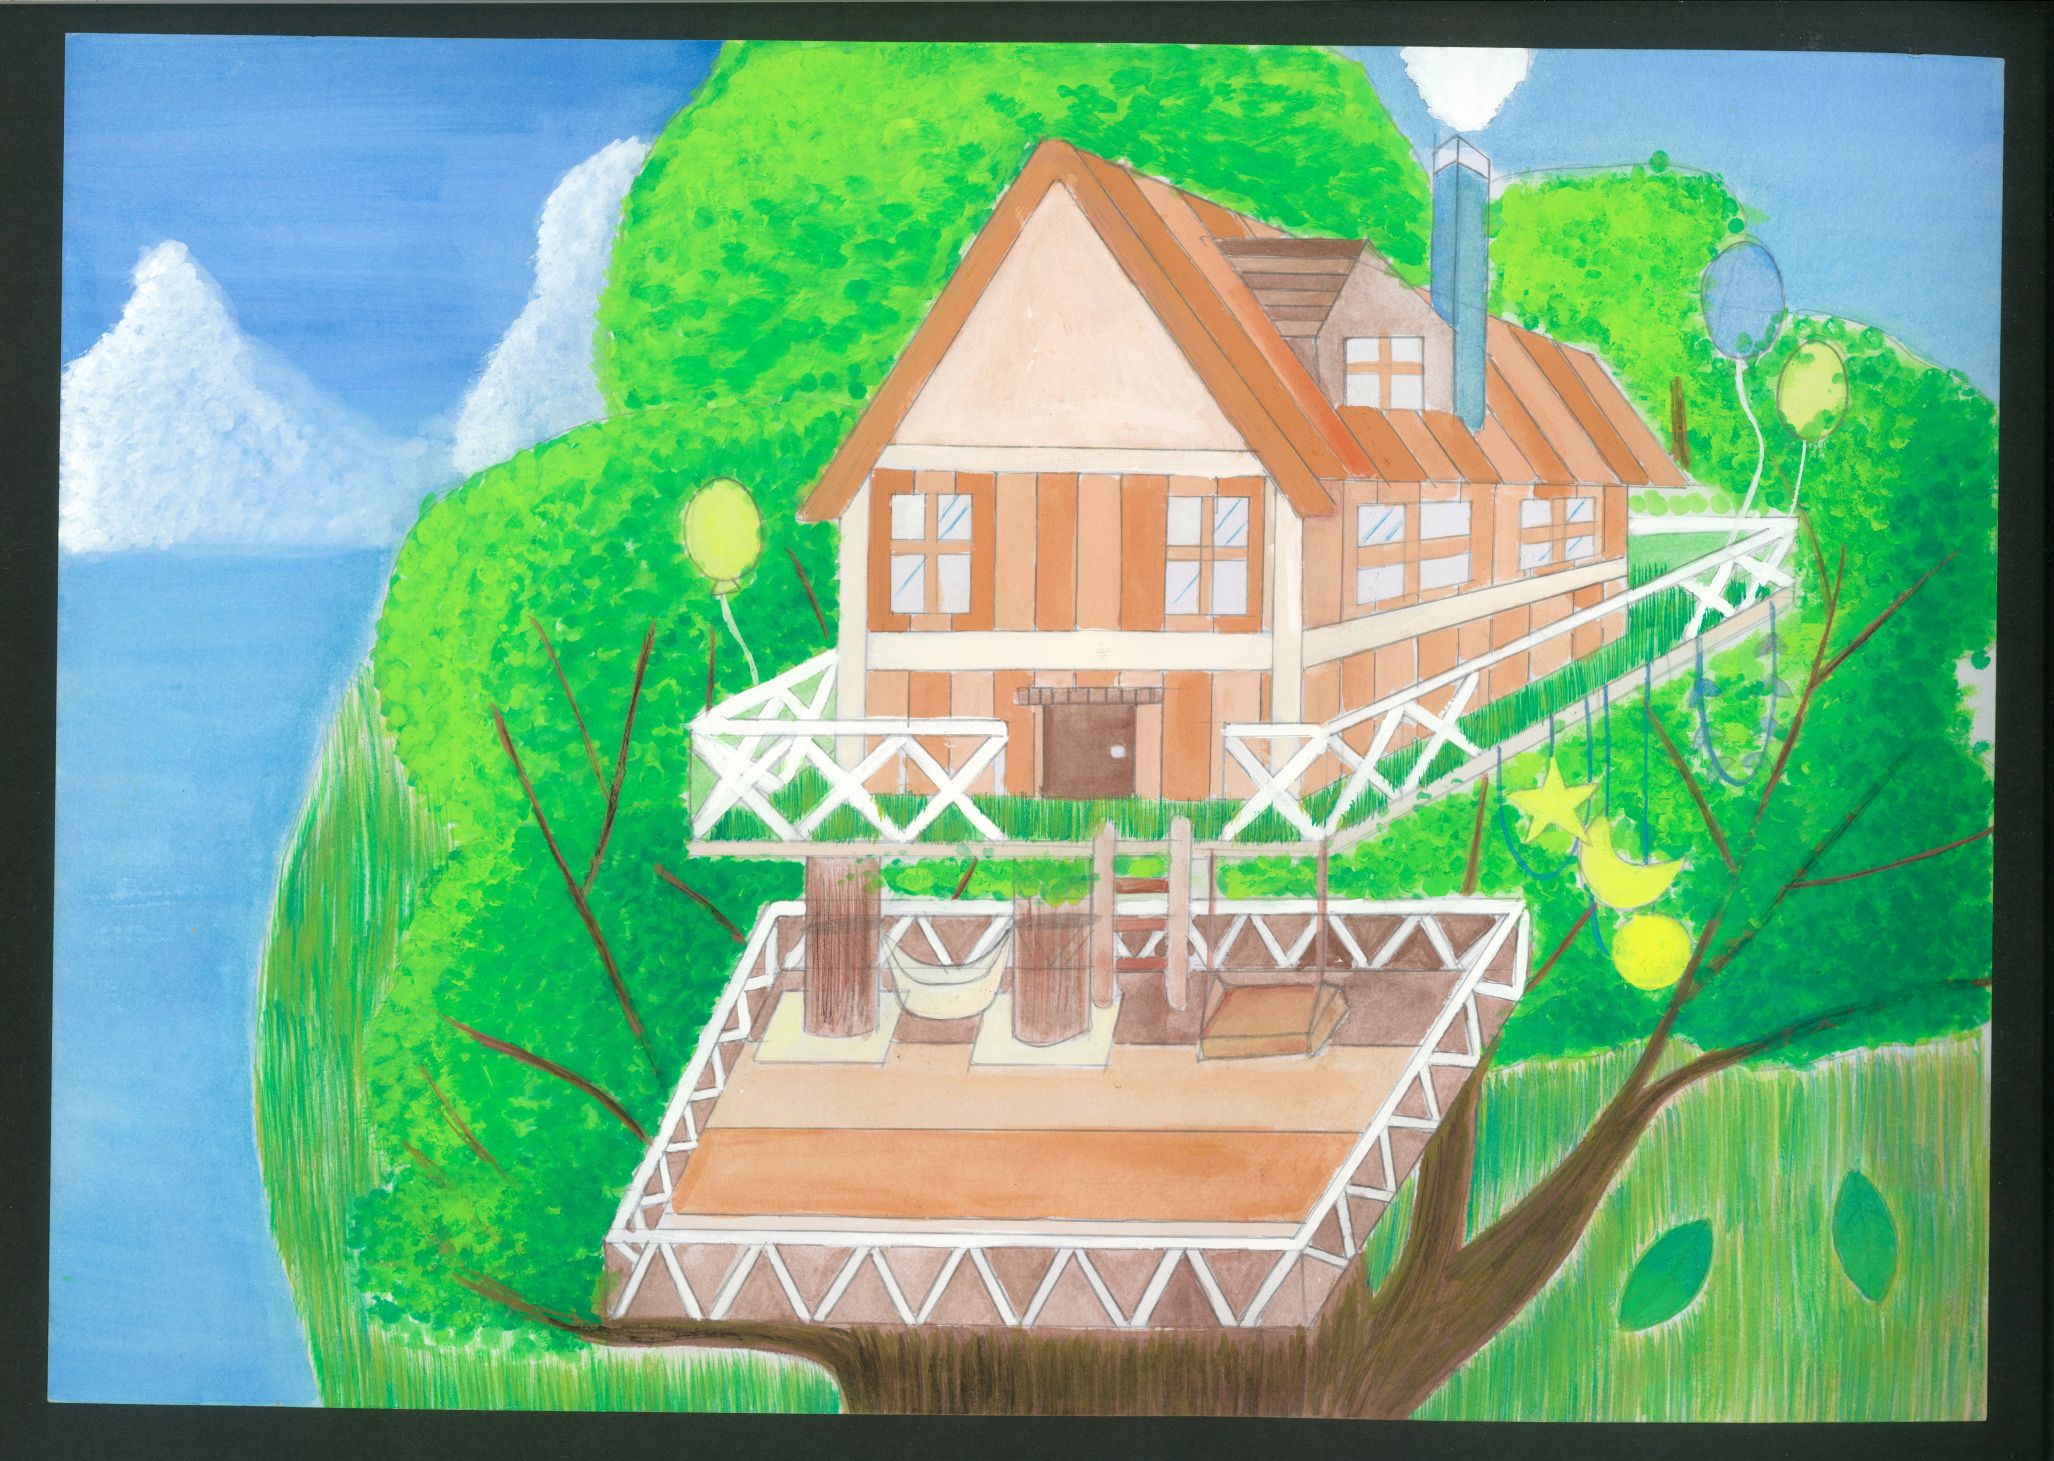 Student artwork – Tree house with a view of the sea (living with nature)